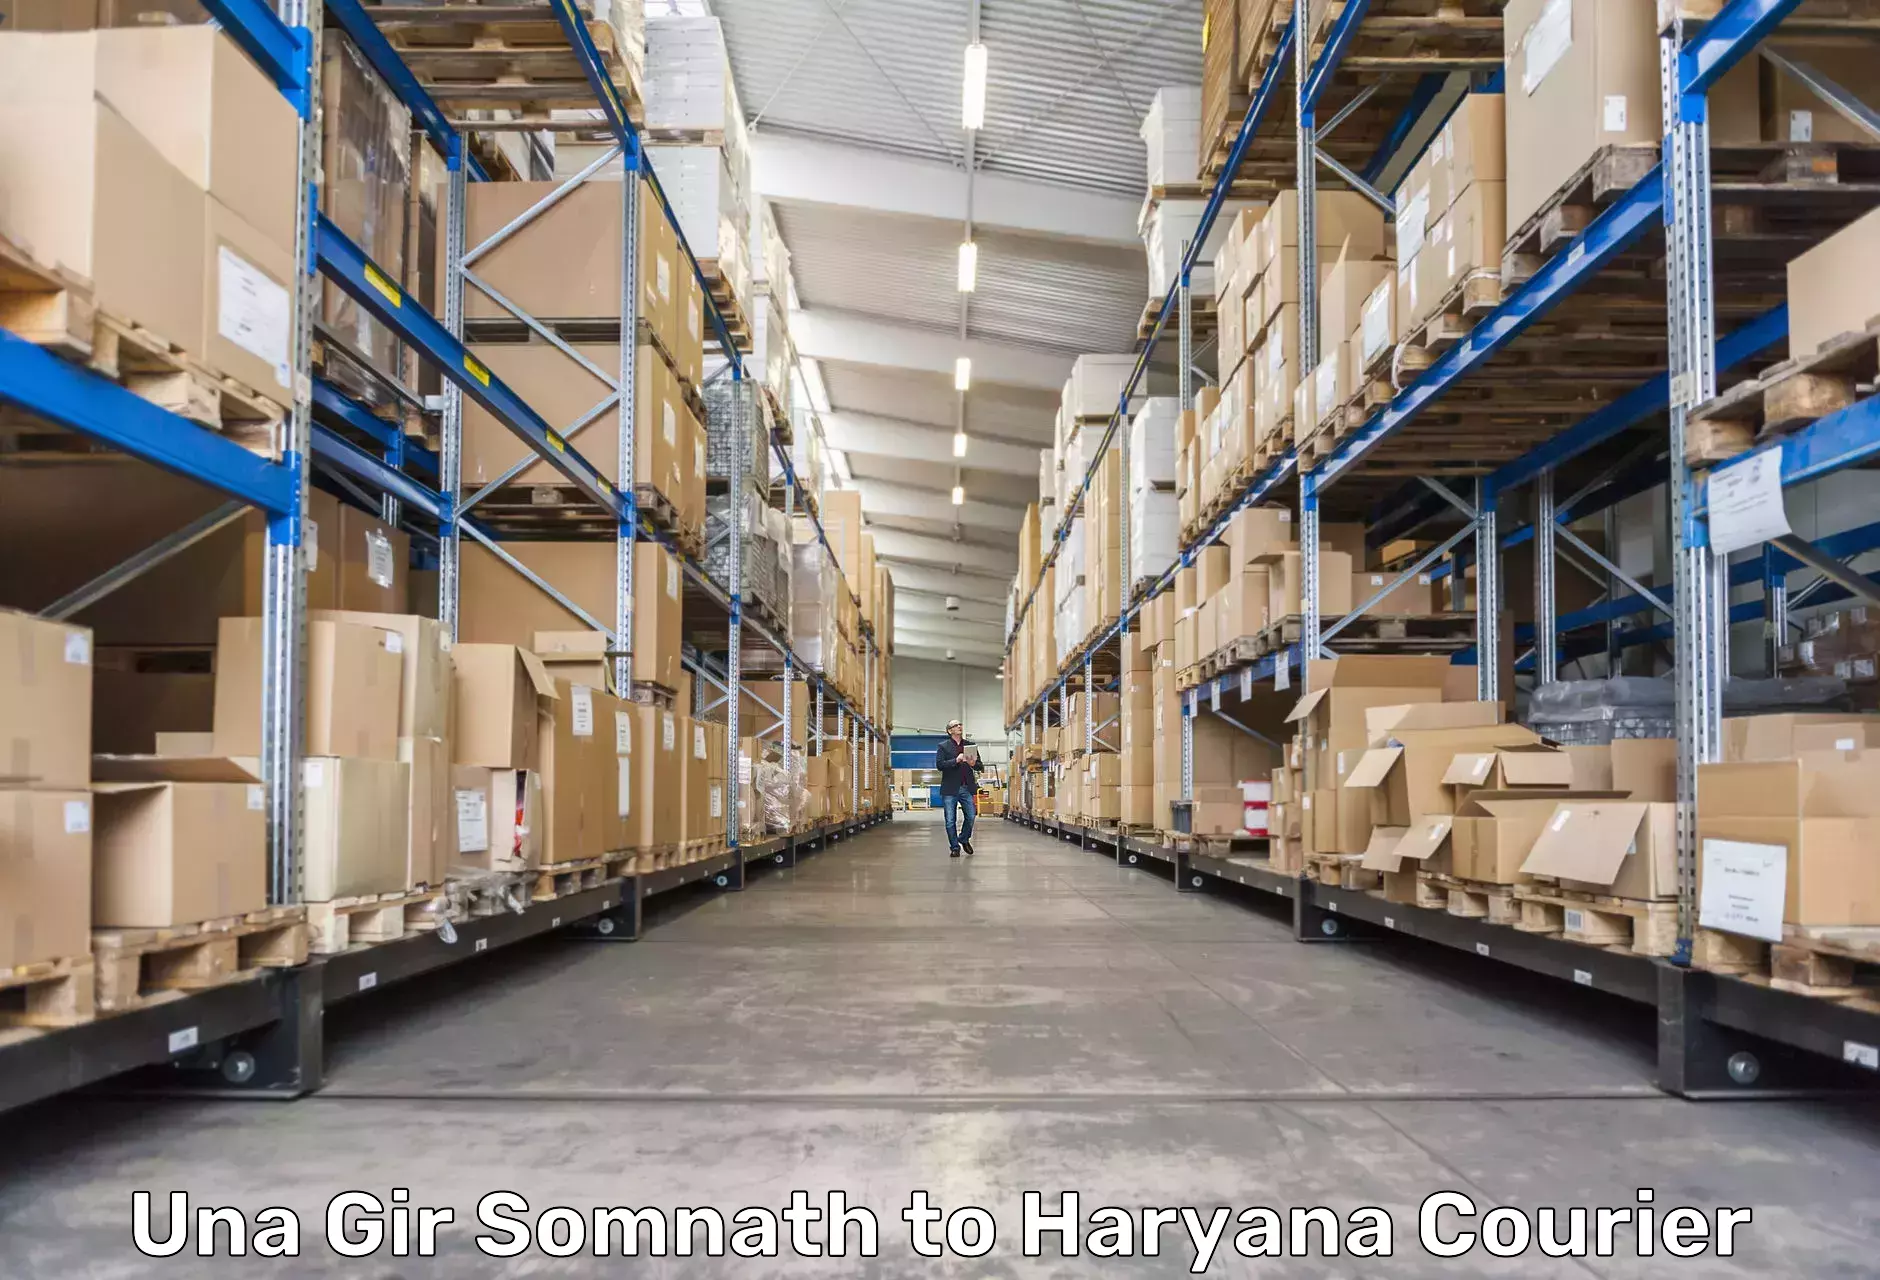 Multi-national courier services Una Gir Somnath to Chaudhary Charan Singh Haryana Agricultural University Hisar